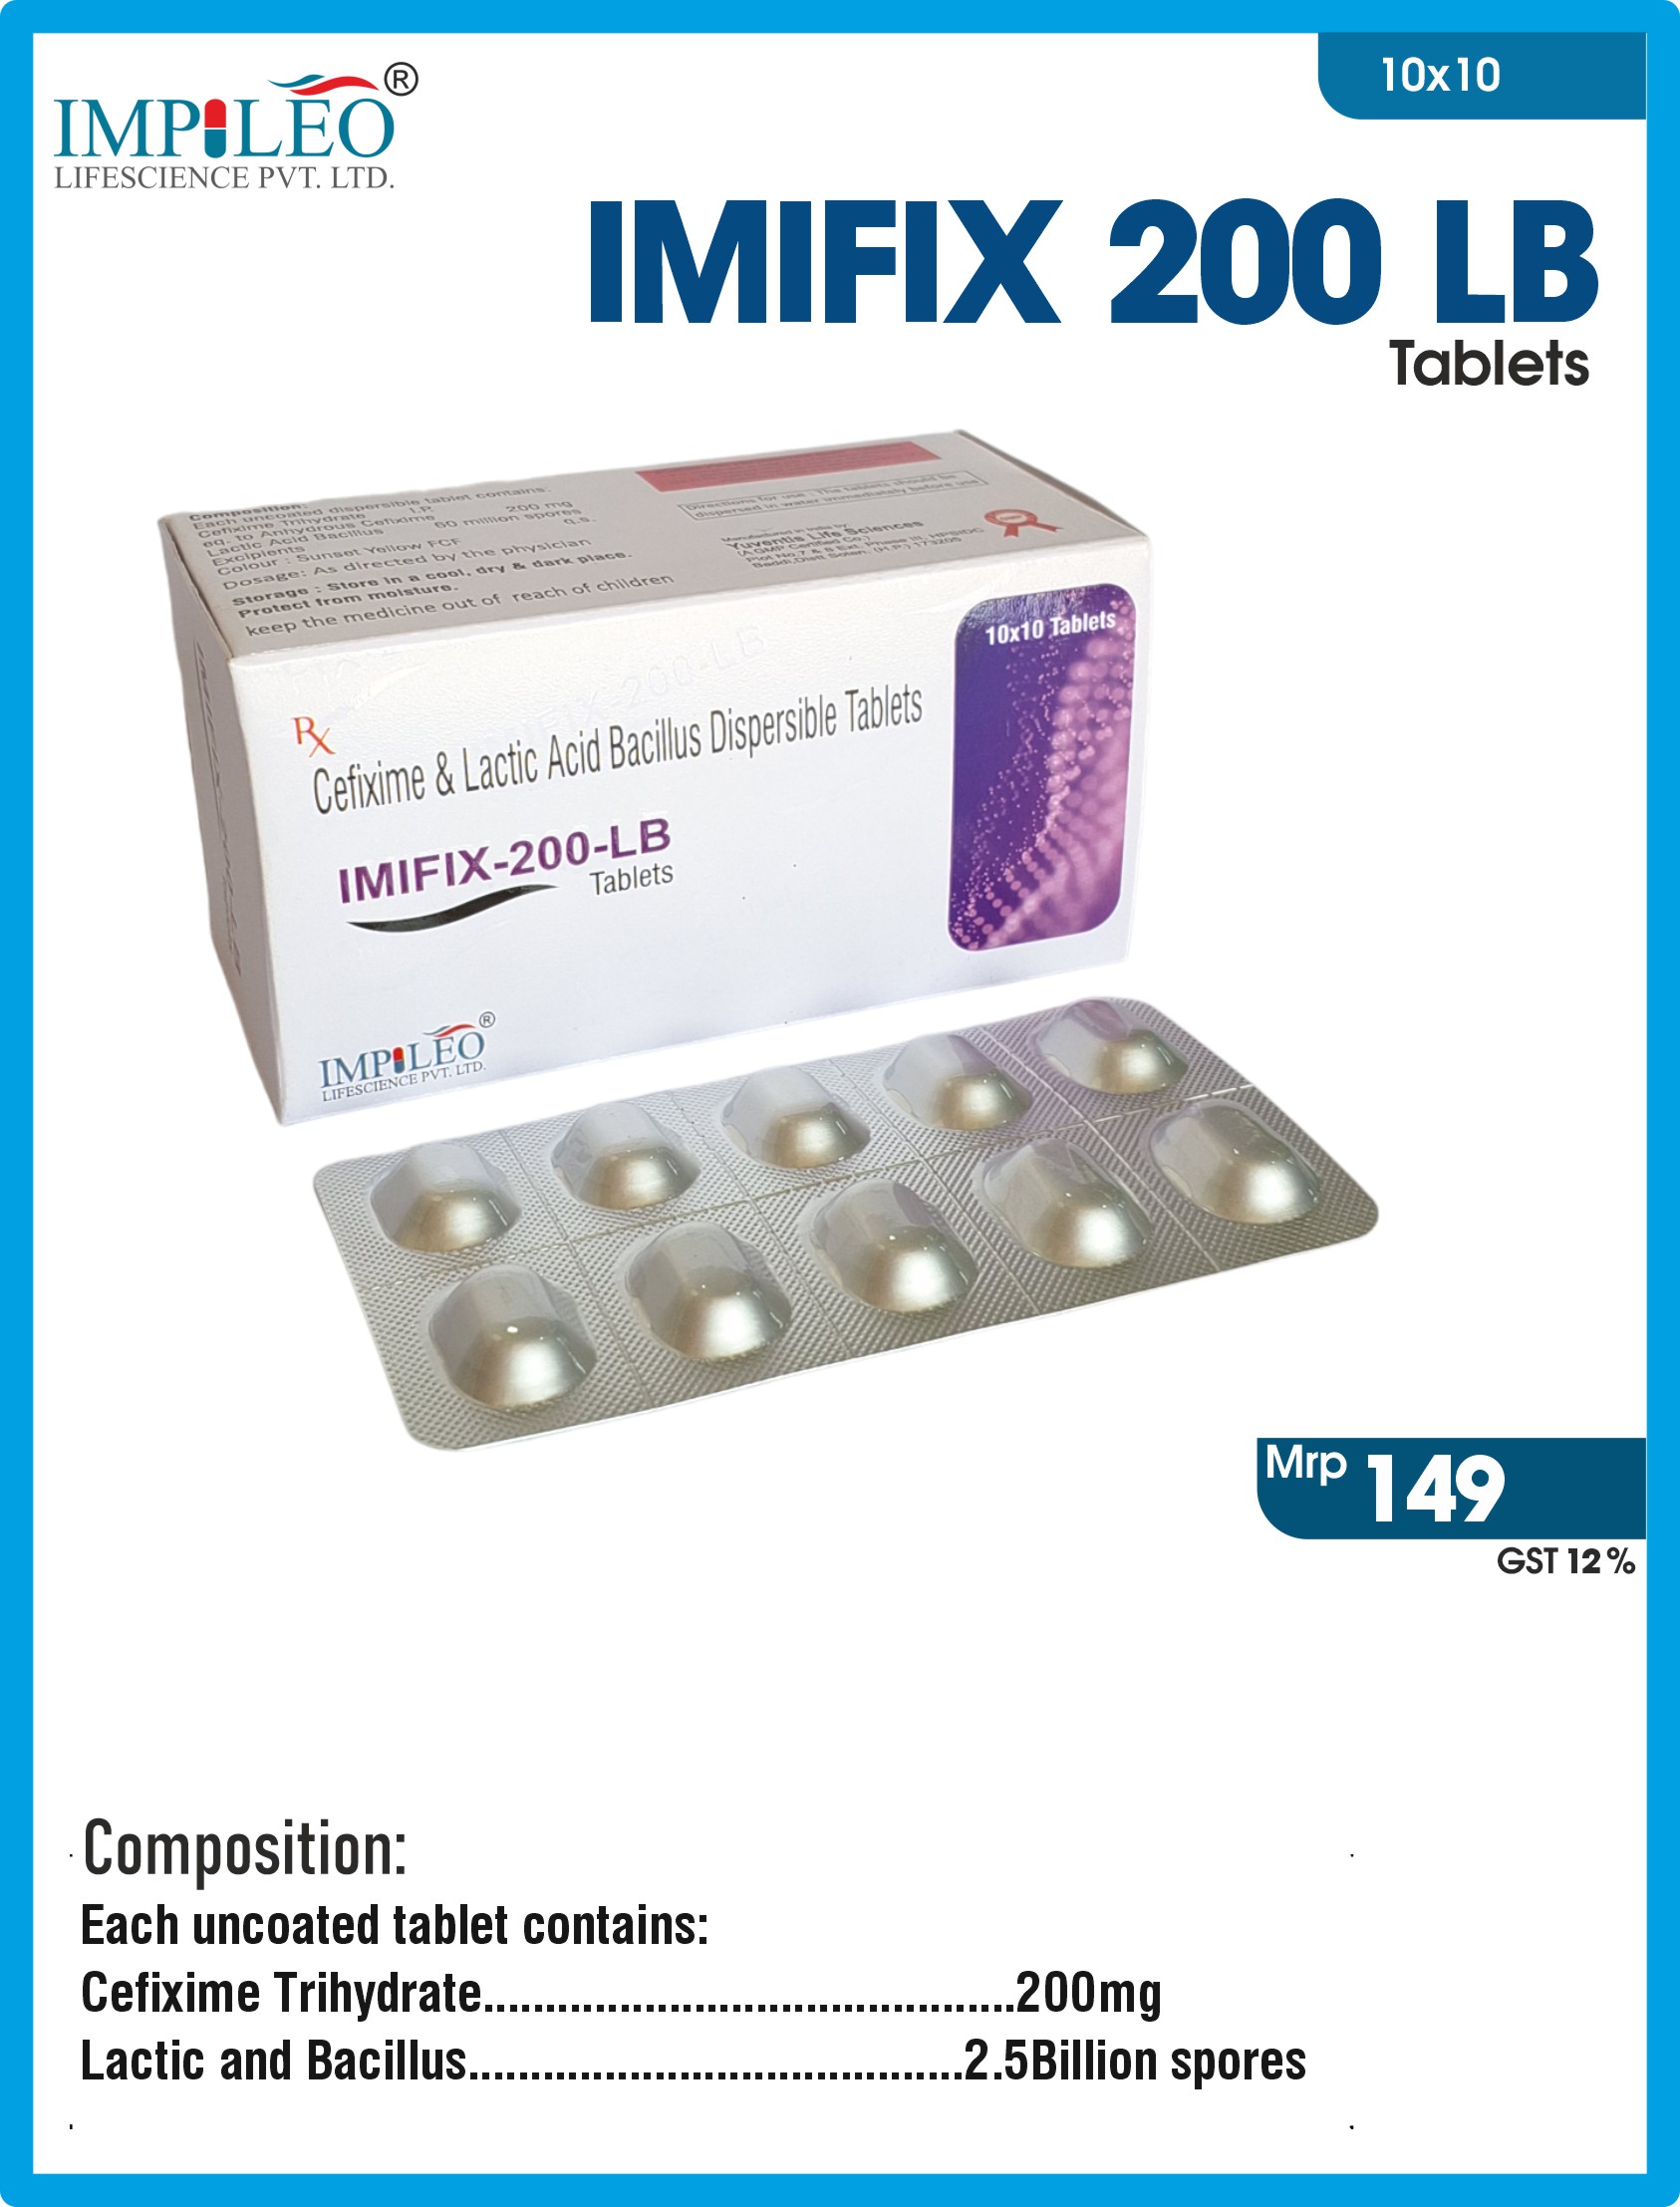 Experience Excellence: IMIFIX 200 LB Tablets from Top Third-Party Manufacturing in India